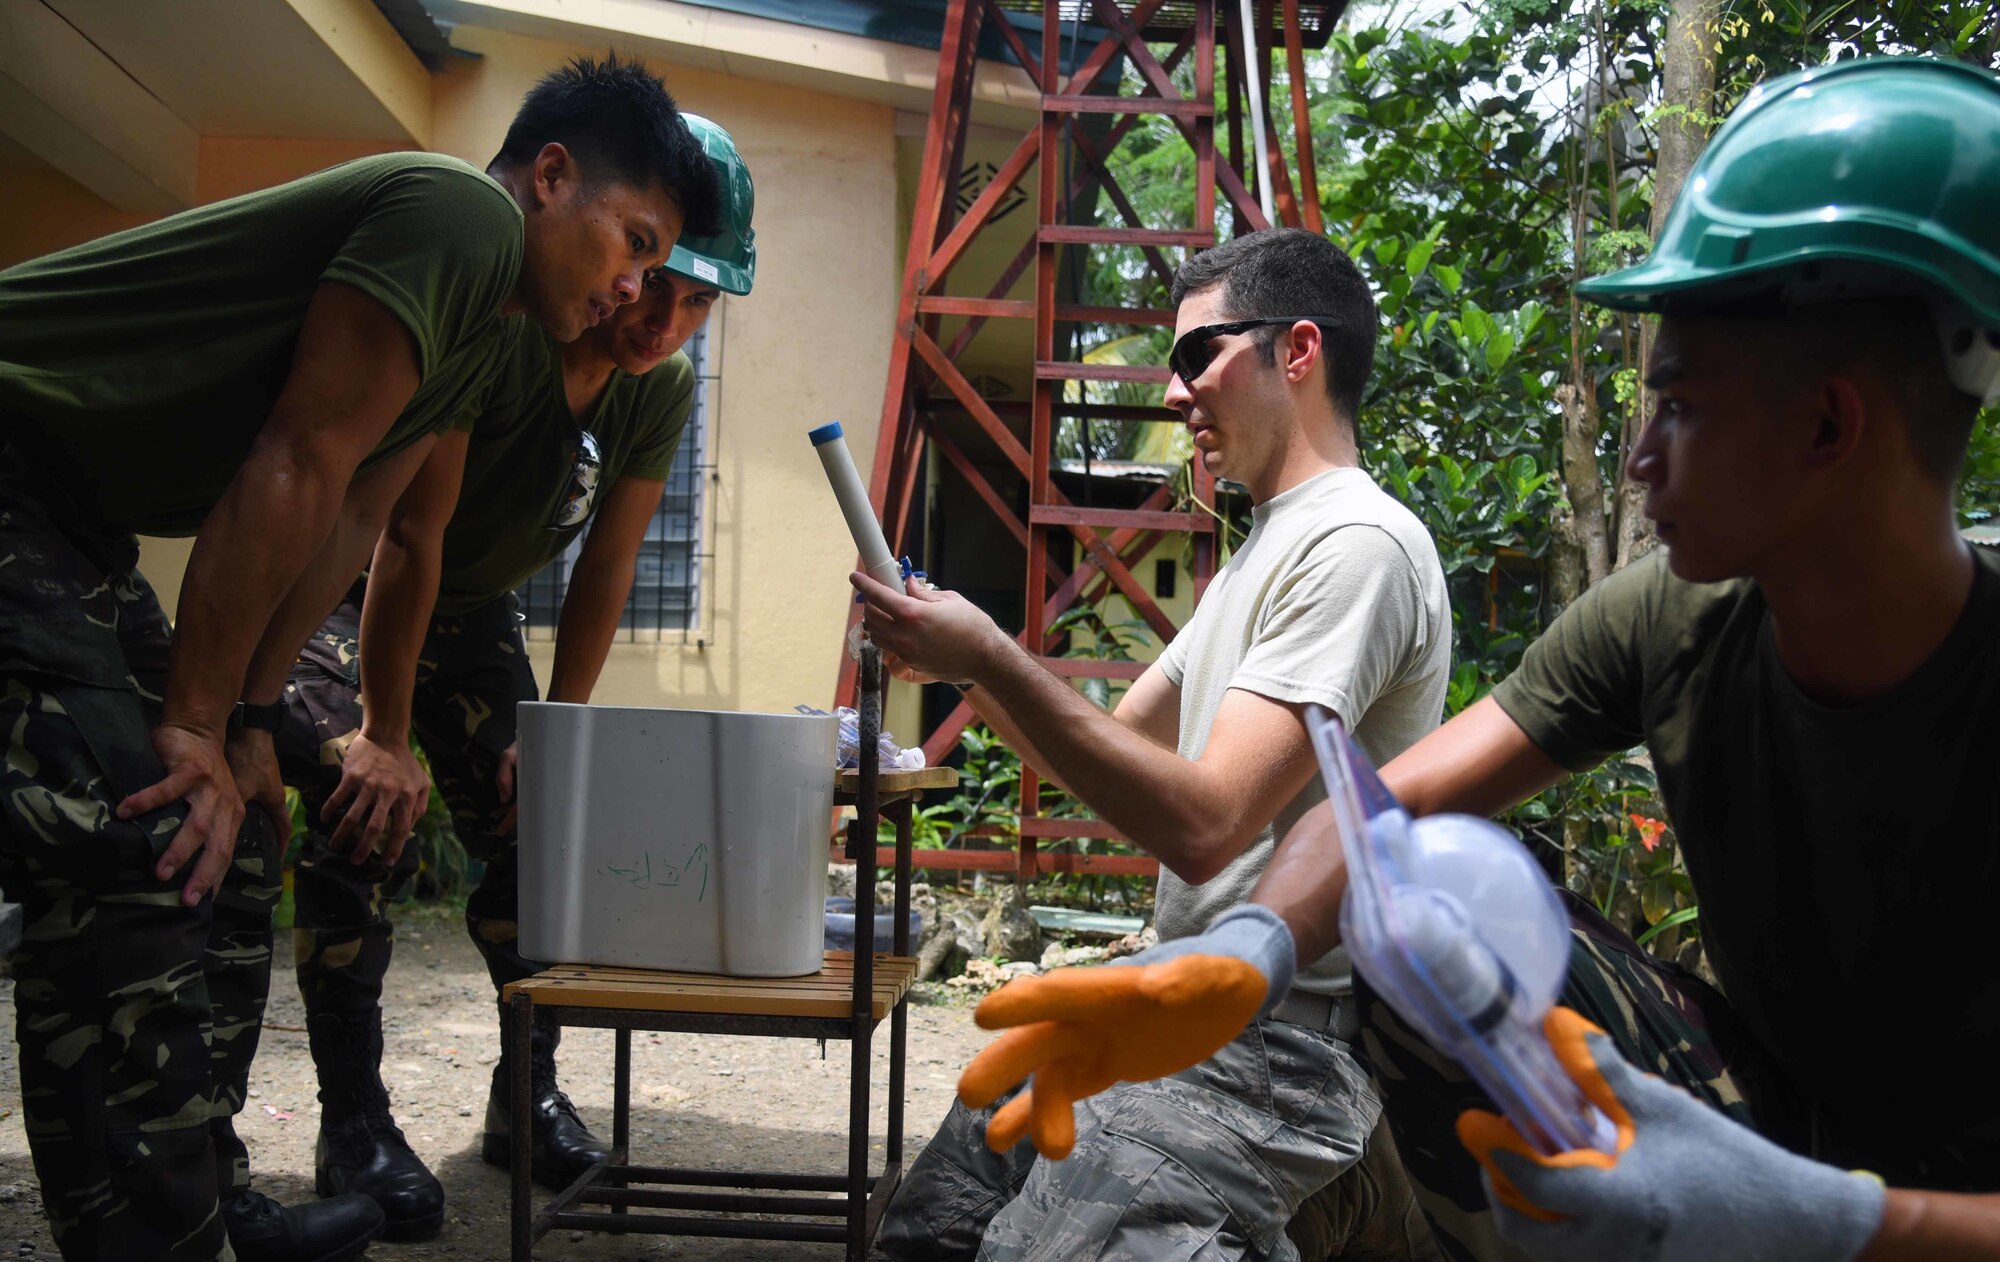 U.S. Air Force Staff Sgt. Alexander Kendrick, engineering plumber with the 354th Civil Engineer Squadron, Eielson Air Force Base, Alaska, middle, provides plumbing installation guidance to Armed Forces of the Philippines members during Pacific Angel (PACANGEL) 2017 in Bogo City, Northern Cebu Province, Philippines, June 24, 2017. Efforts undertaken during PACANGEL help multilateral militaries in the Pacific improve and build relationships across a wide spectrum of civic engagements, which bolsters each nation’s capacity to respond and support future humanitarian assistance and disaster relief operations. (U.S. Air Force photo/Tech. Sgt. Jeff Andrejcik)